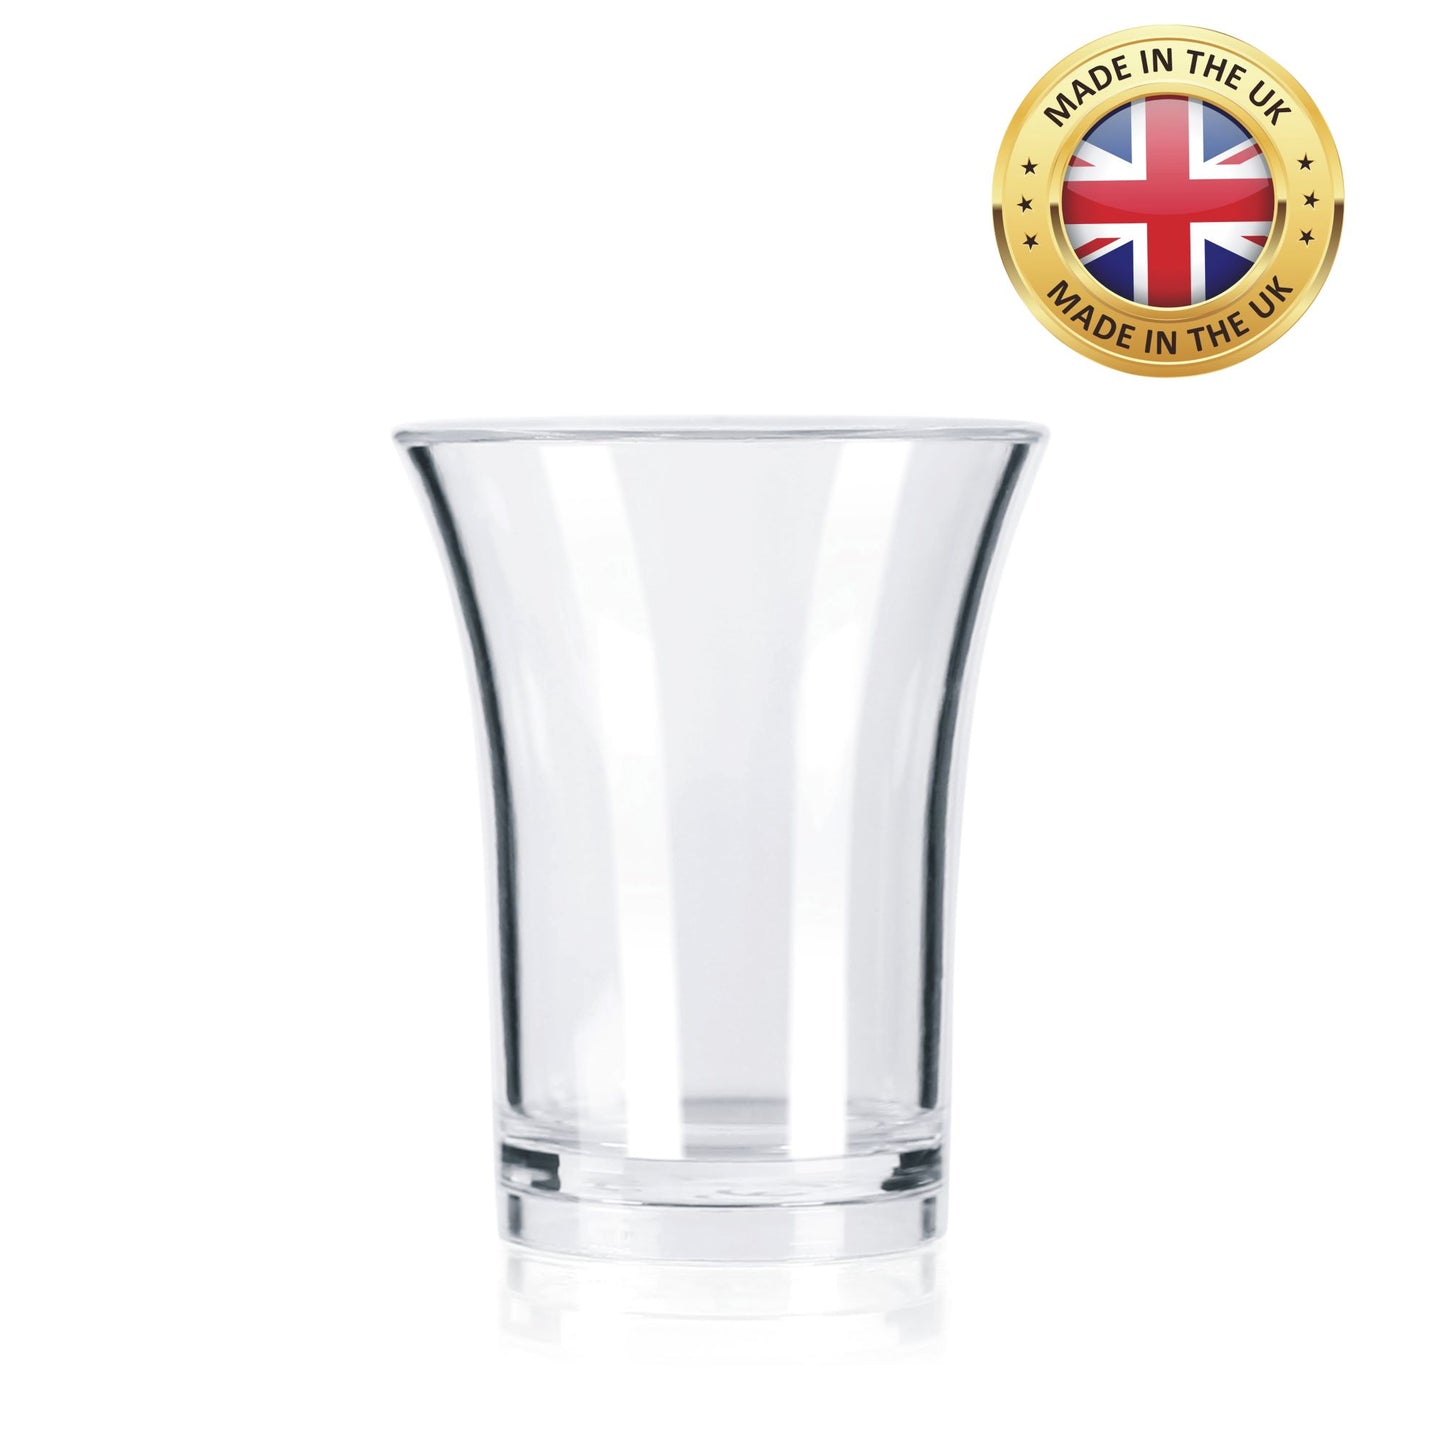 100 x Clear Shot Glasses Heavy Duty Strong Reusable Plastic 25ml CE Marked, Stackable. Bars, Pubs, BBQs, Jelly Shots, Liquor, Spirits-5056020180043-PCUP-SHOTx100-1-Product Pro-25ml, Clear Shot Glasses, Plastic Shot Glasses, Reusable Shot Glasses, Shot Glasses, Shots